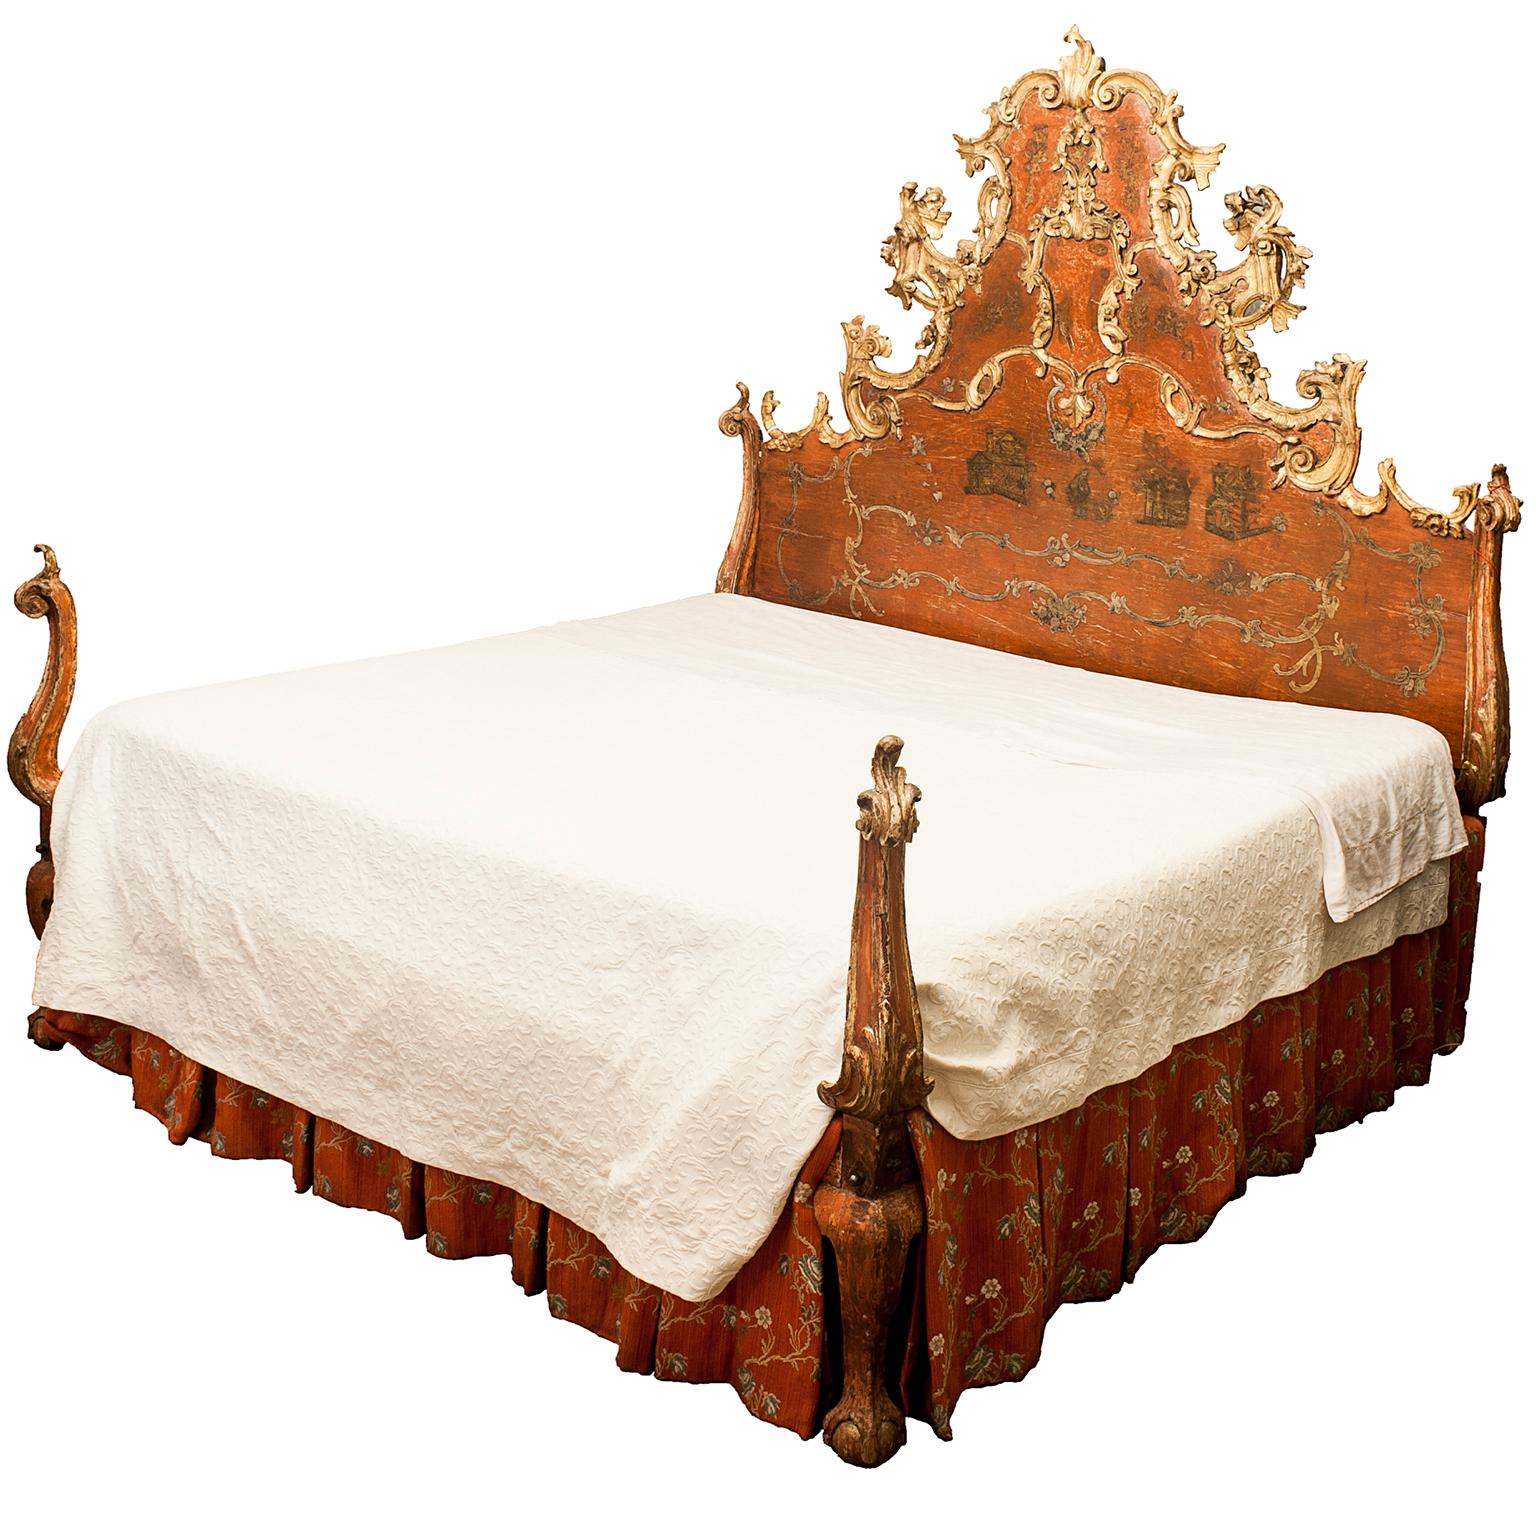 Very important Spanish Baroque bed, in 